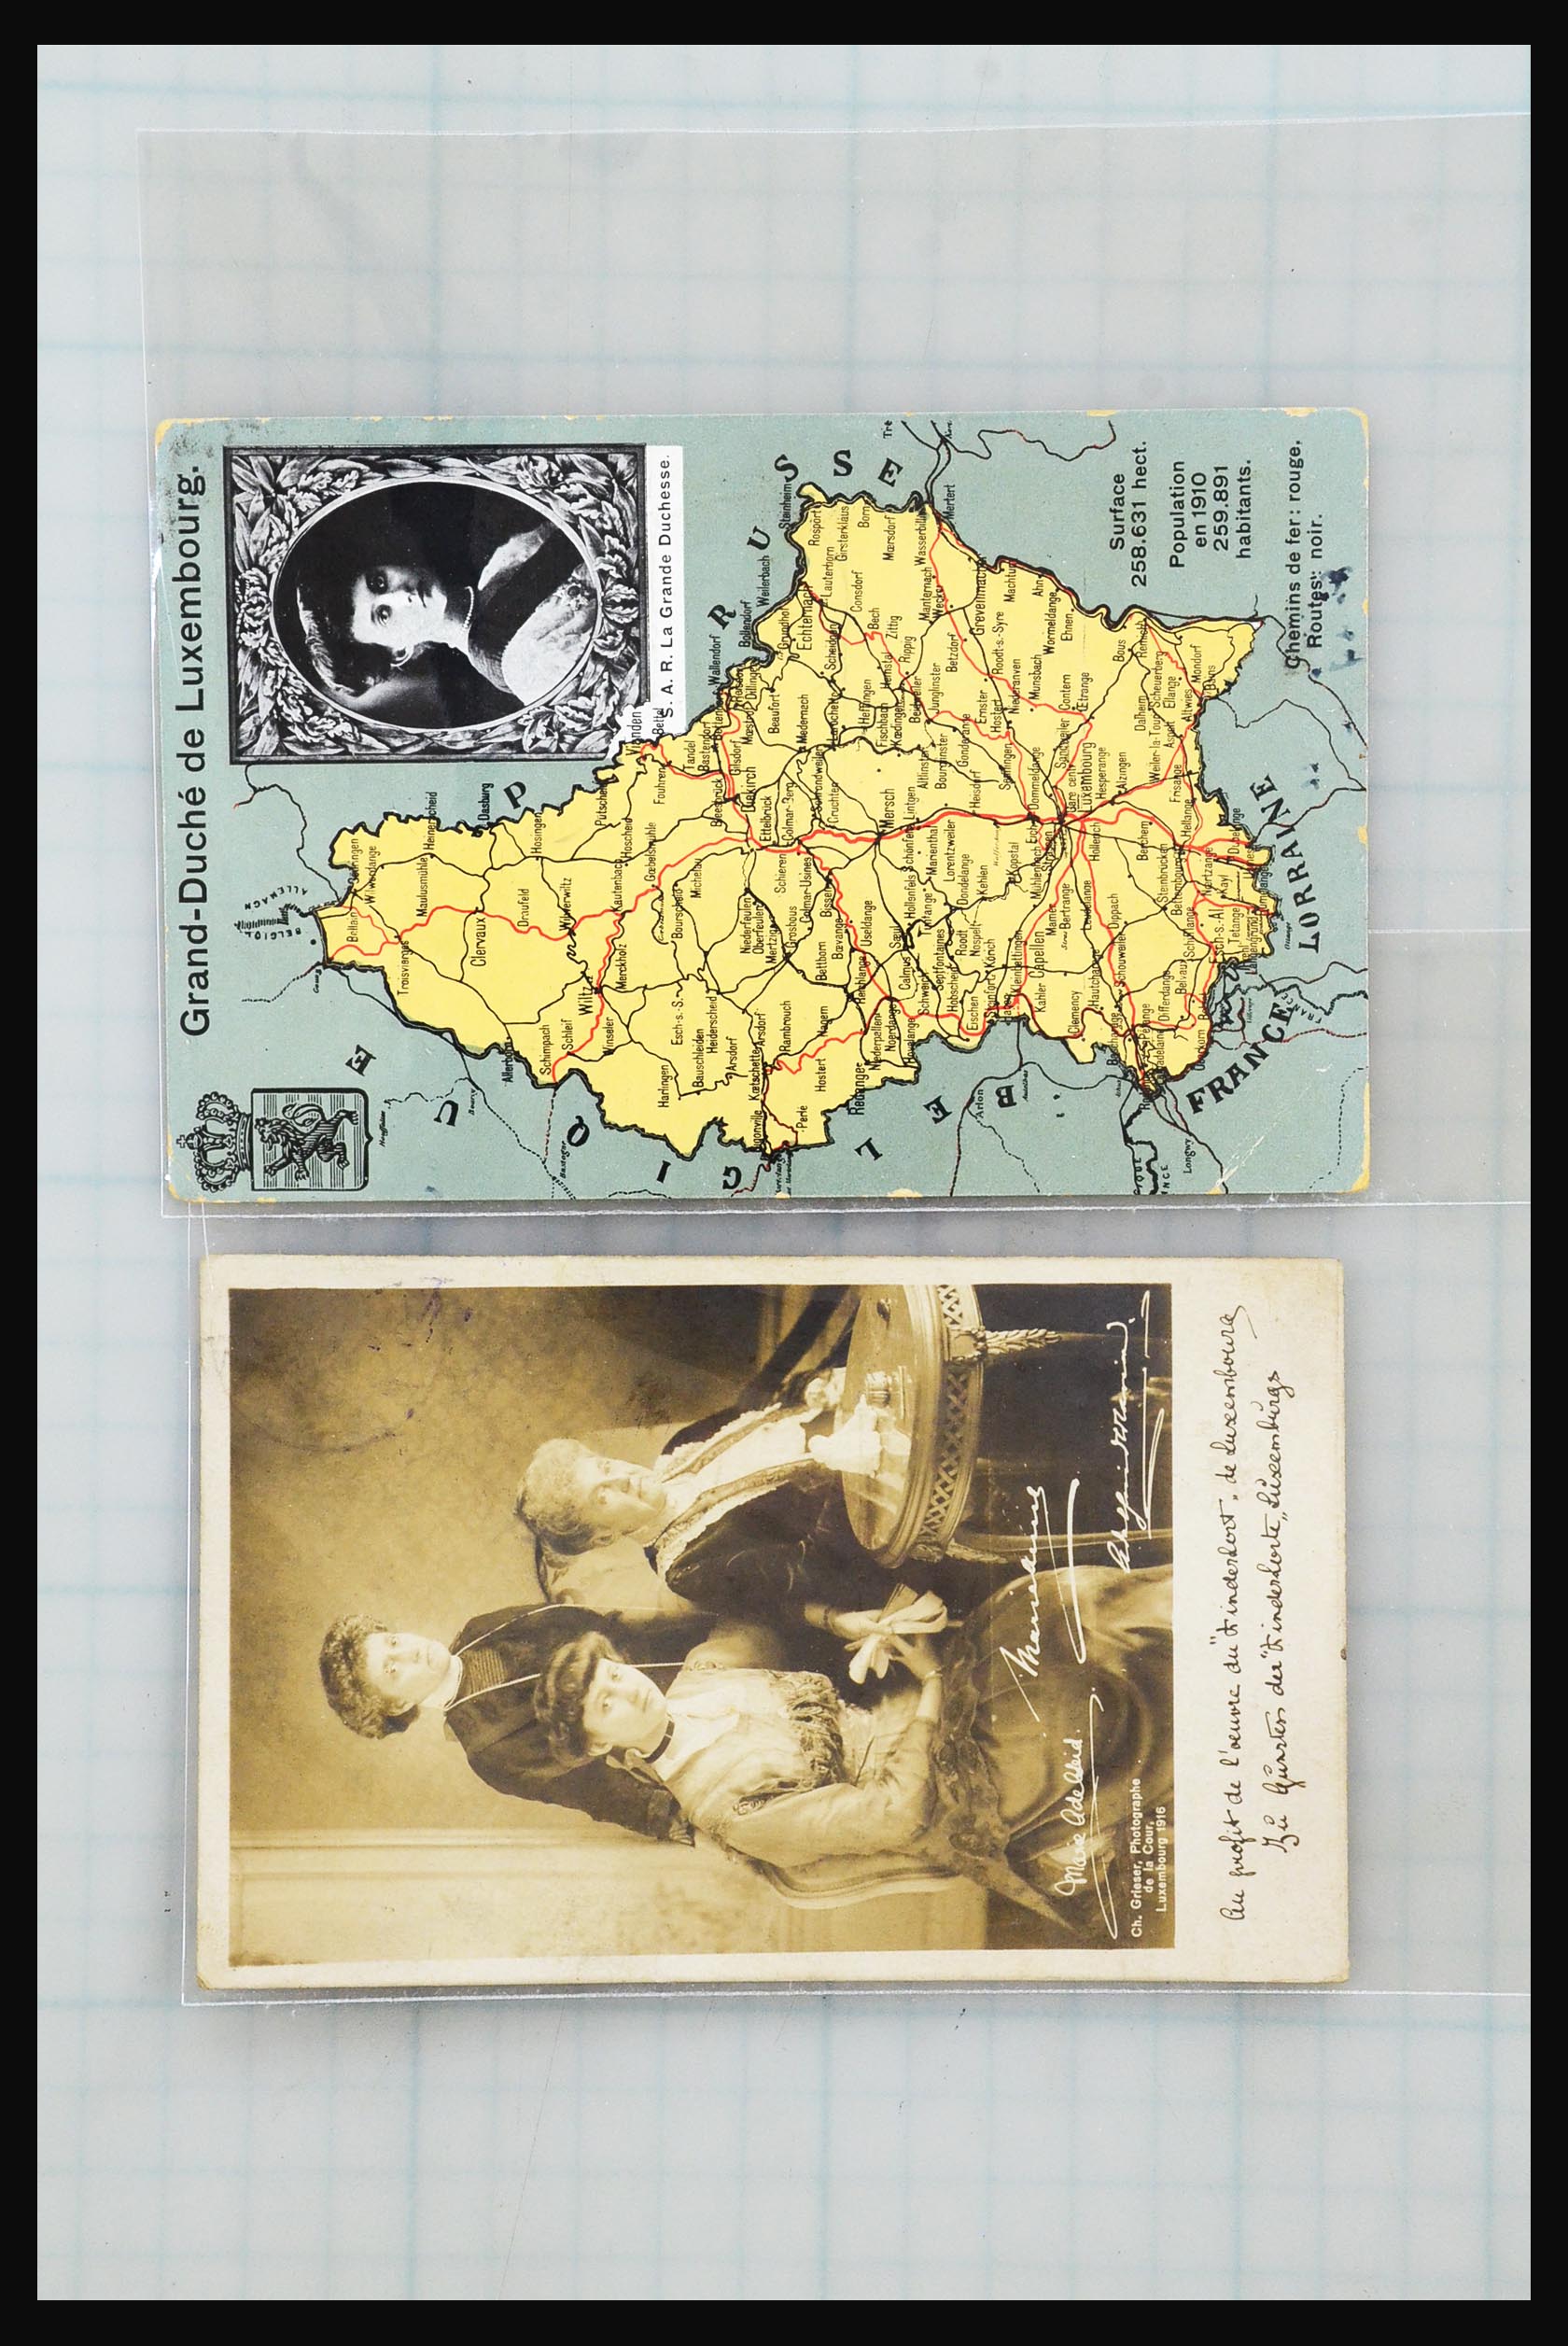 31358 010 - 31358 Portugal/Luxemburg/Greece covers 1880-1960.